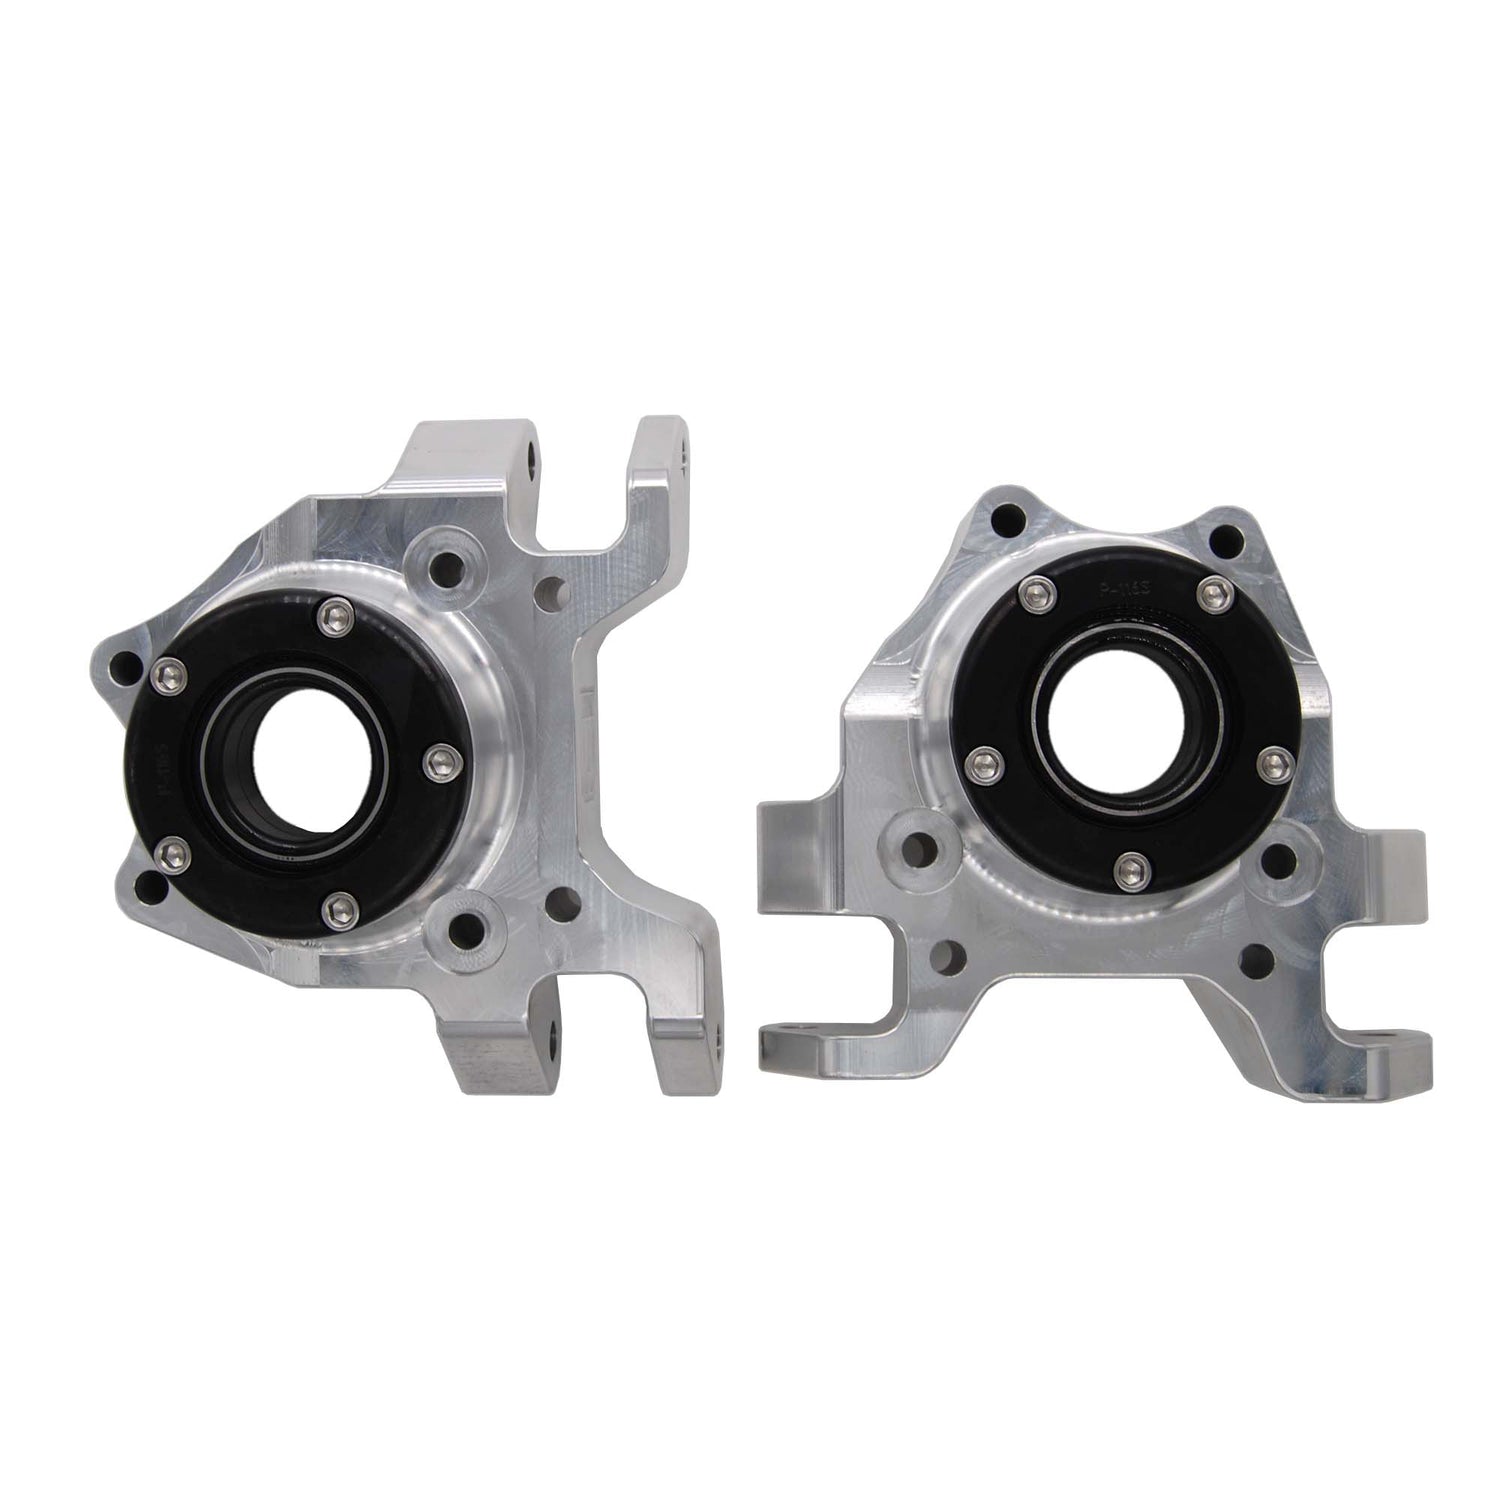 Capped RZR PRO XP Billet Rear Bearing Carrier/Spindle